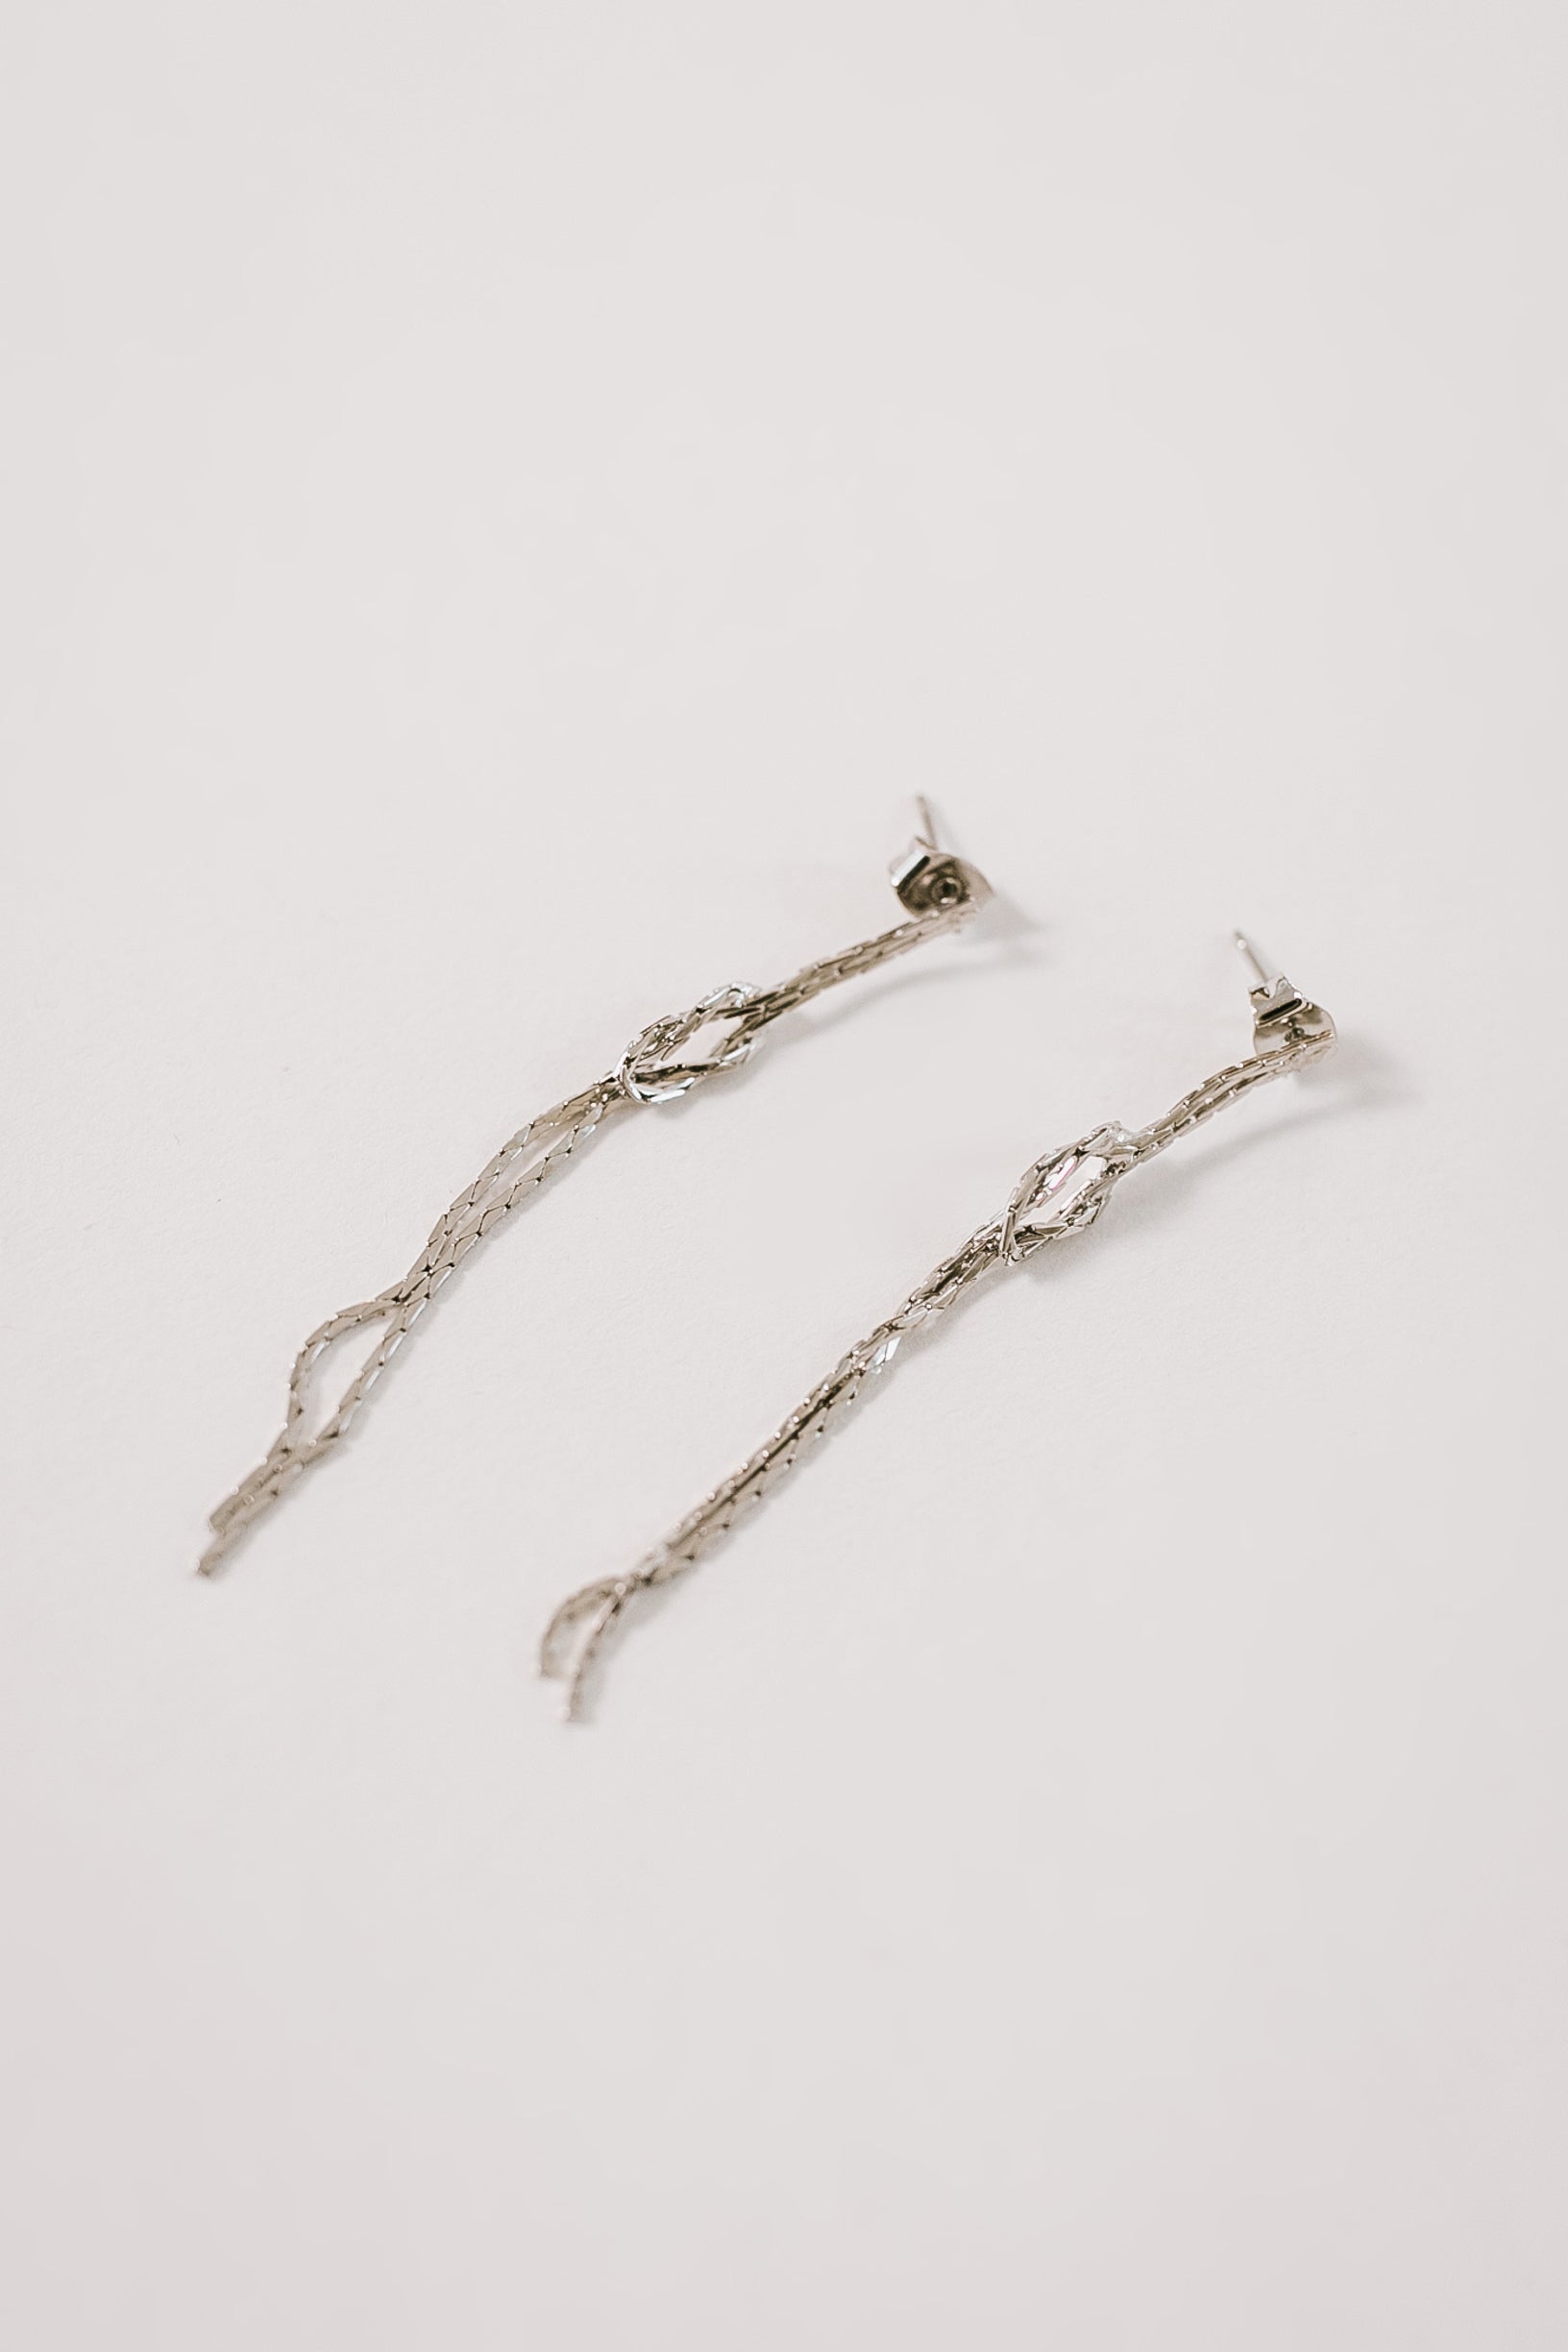 Ideal Knotted Earring - Silver